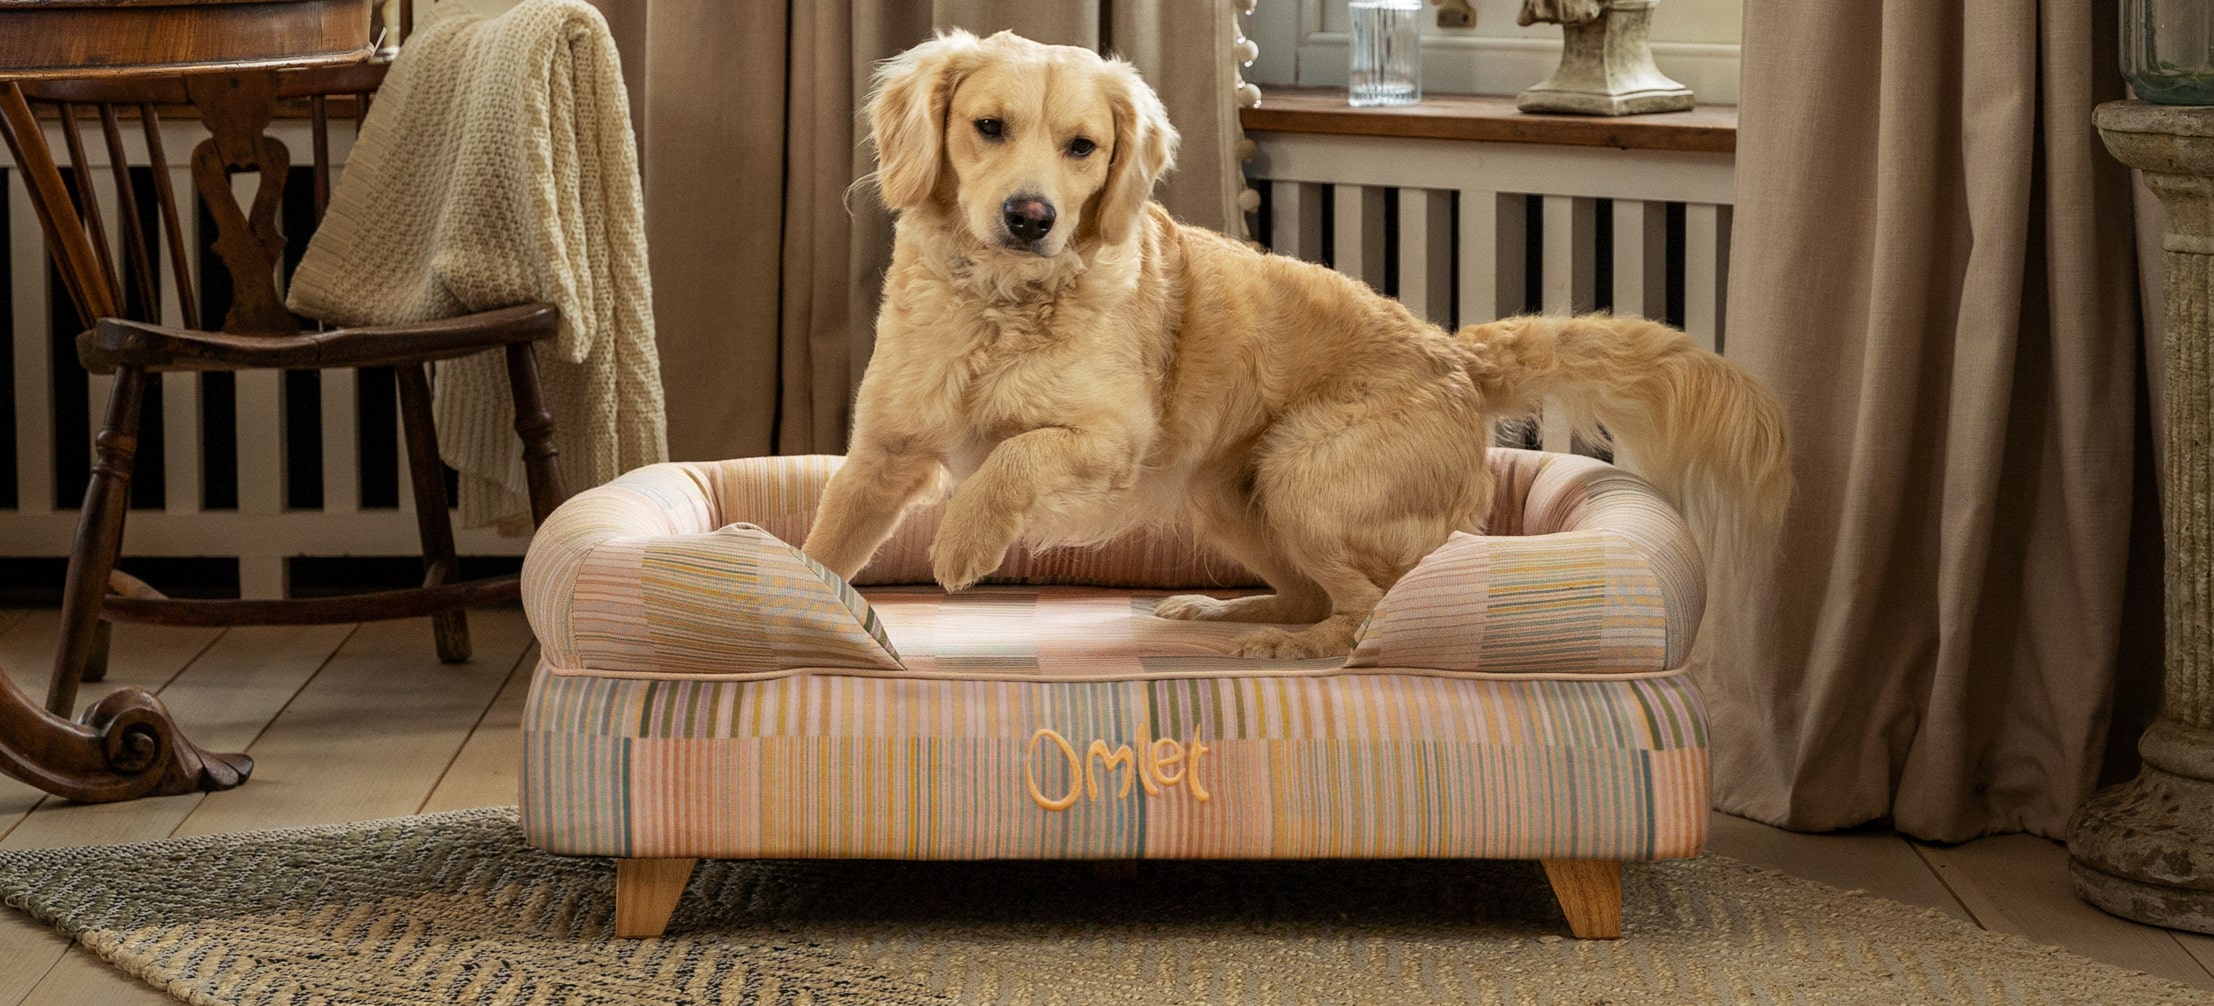 A Golden Retriever using their Omlet Bolster dog bed in Pawsteps Natural